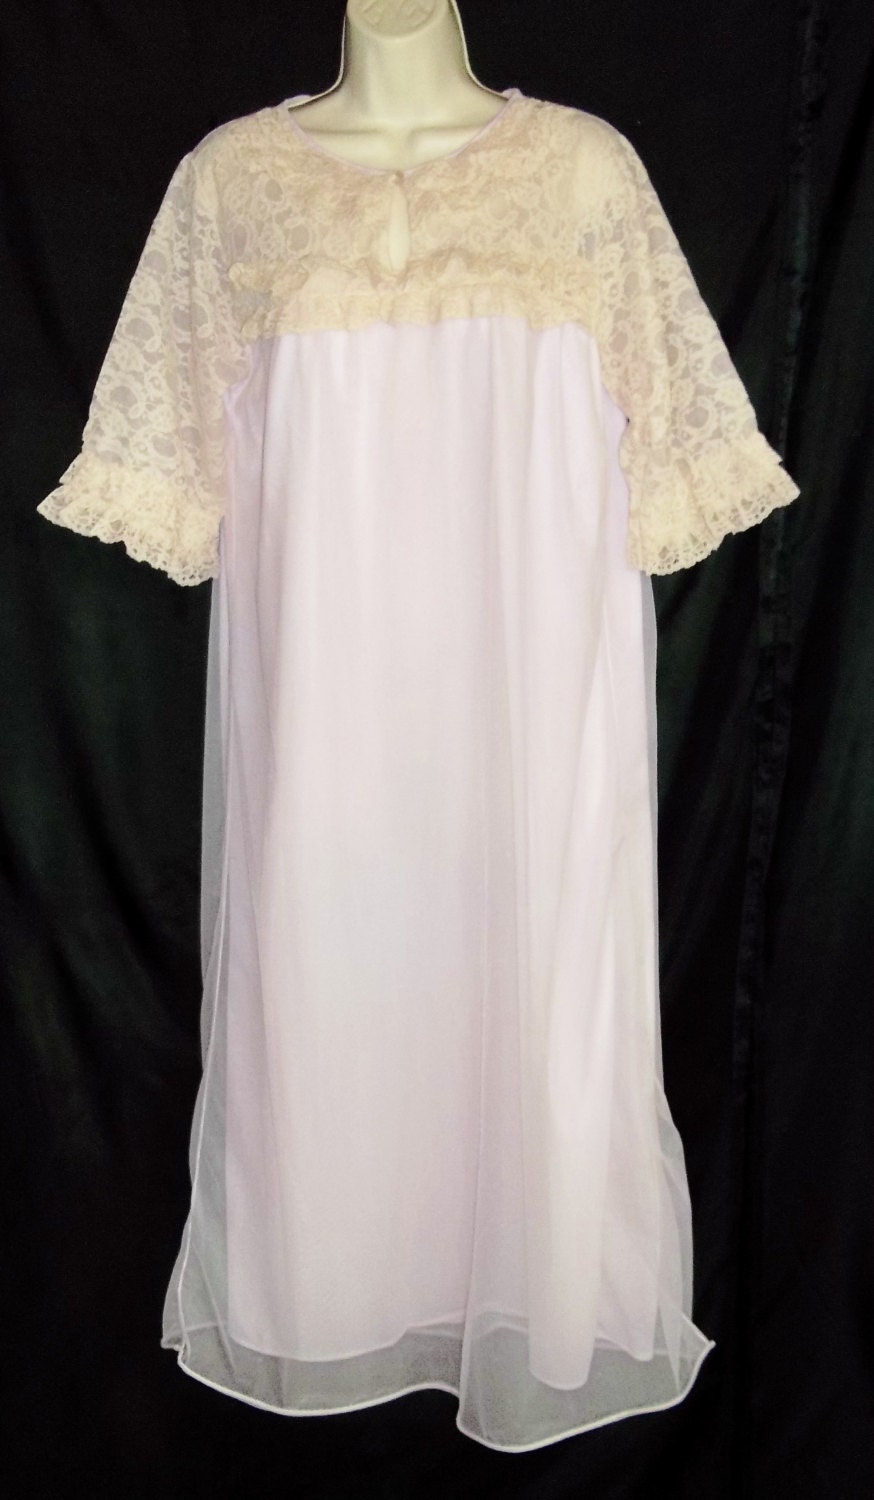 Vintage Lingerie 1950s MARY BARRON Nightgown by ReallyCoolClothes